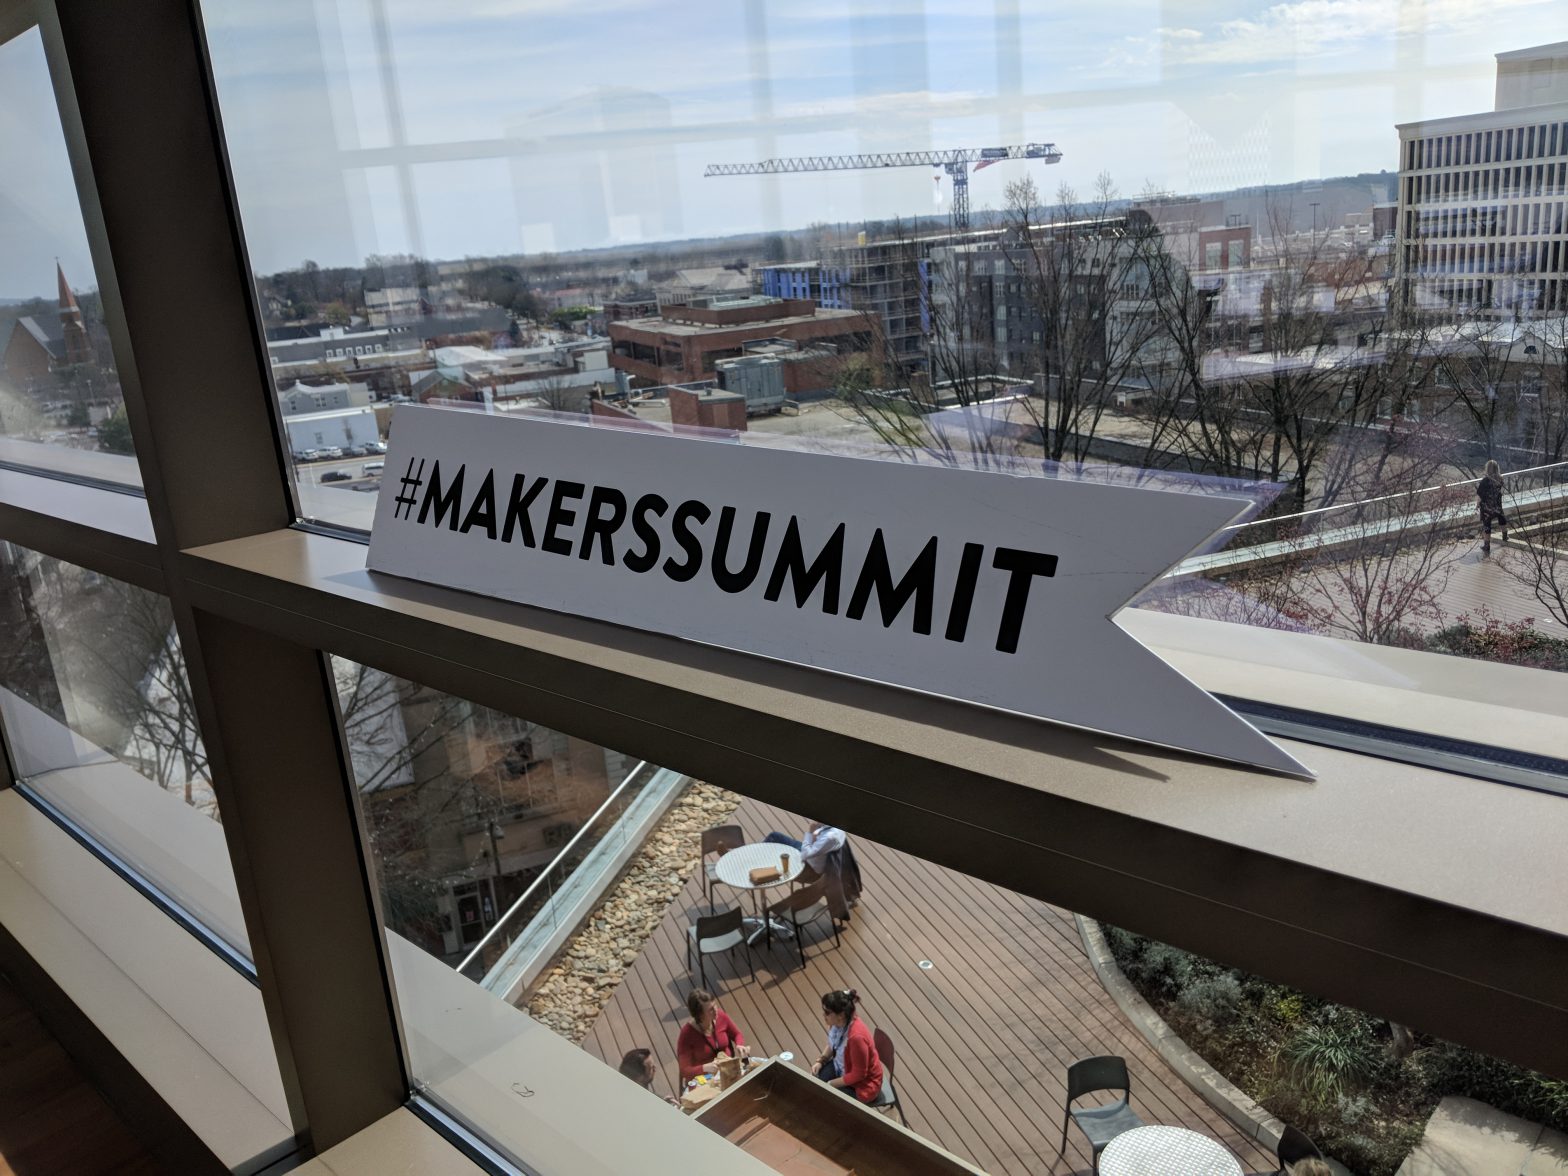 3 Takeaways From Makers Summit 2018